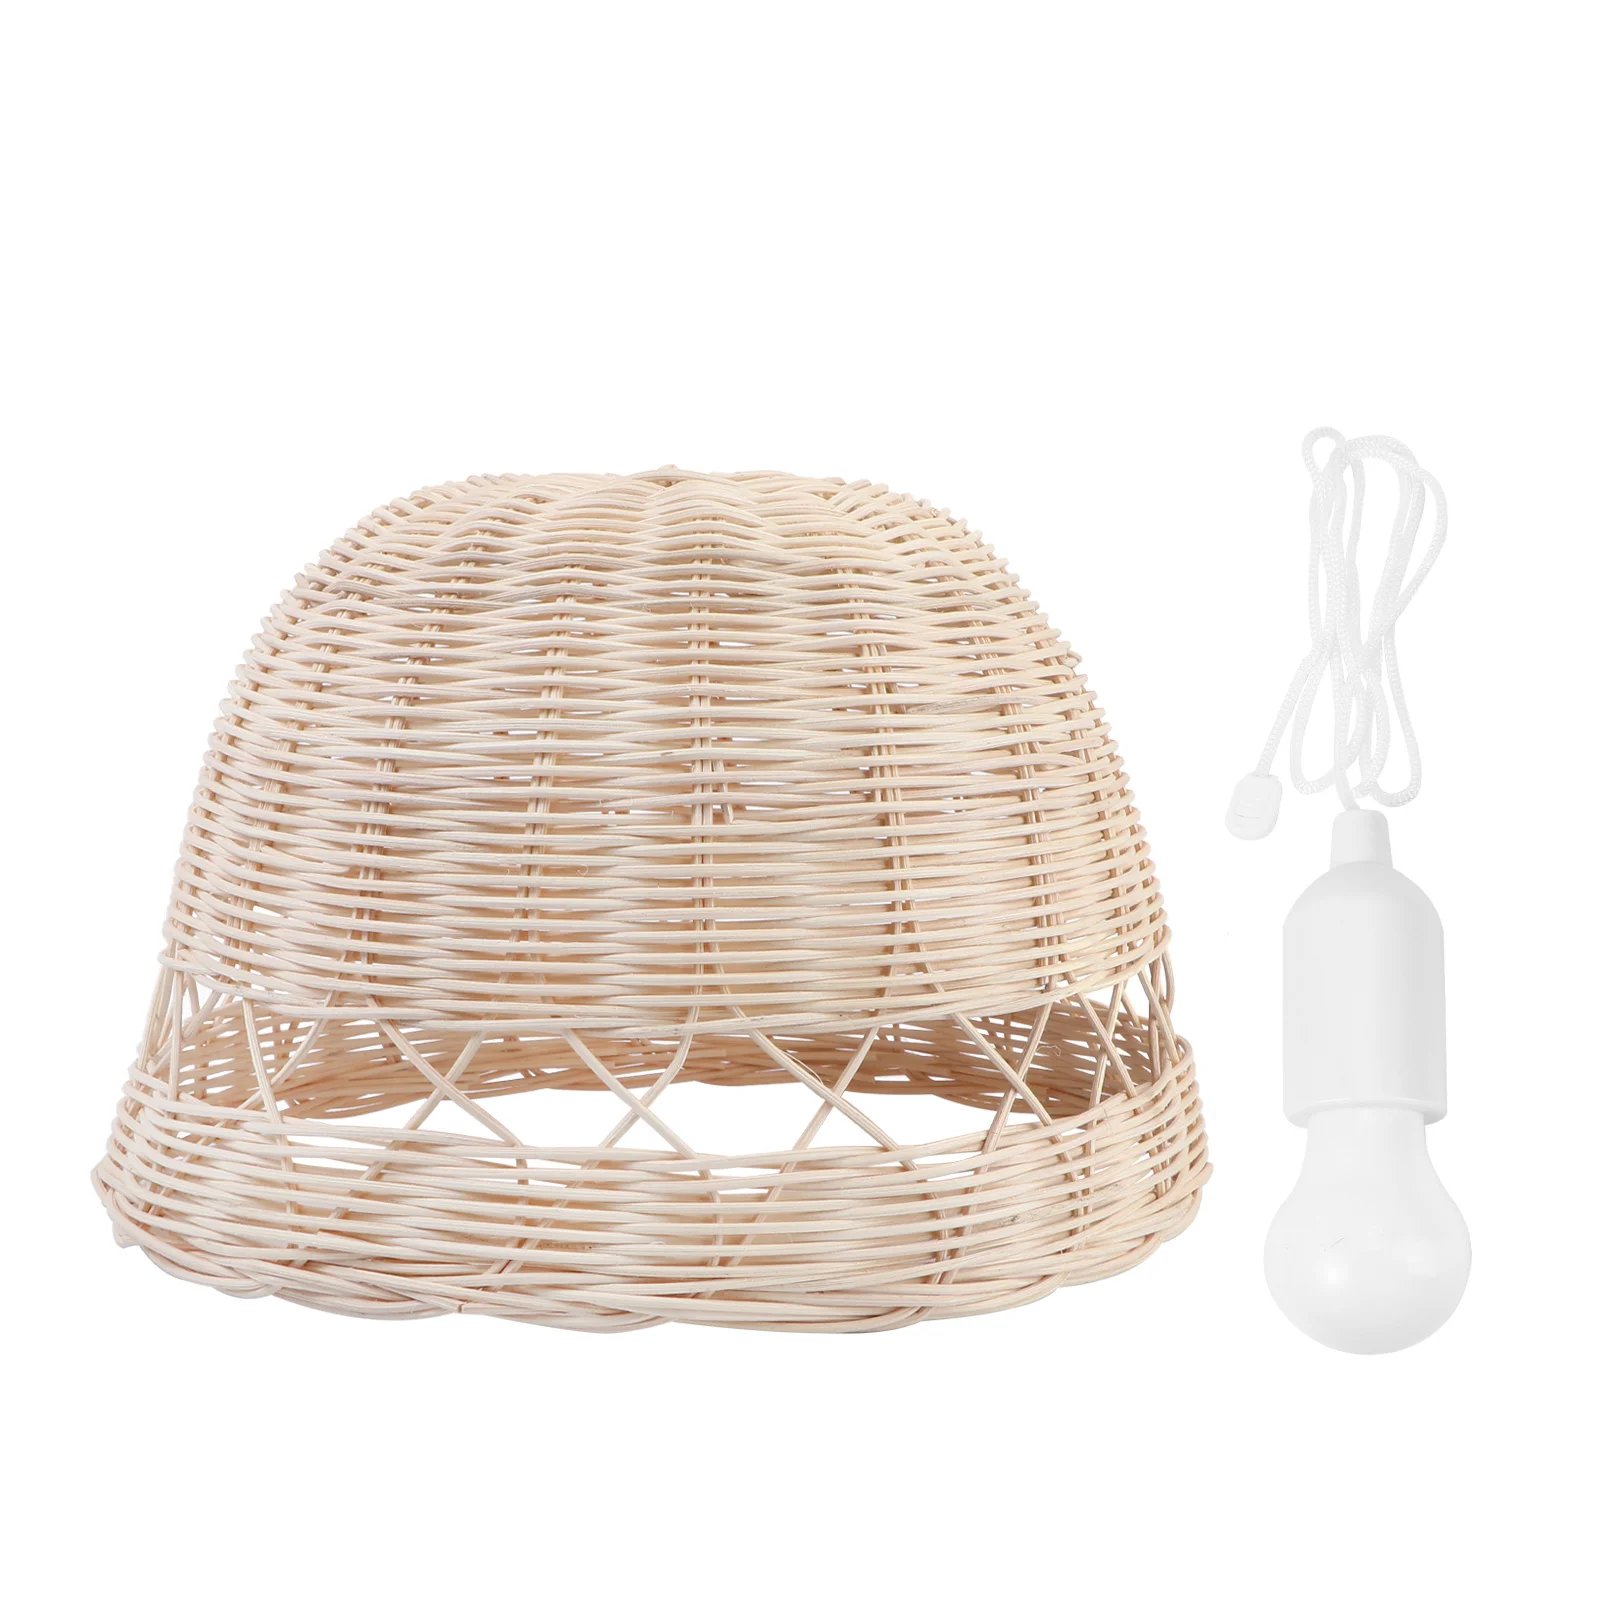 

Wicker Rattan Chandelier Dome Light Fixtures Weaving Lampshade Product Pendant Cover